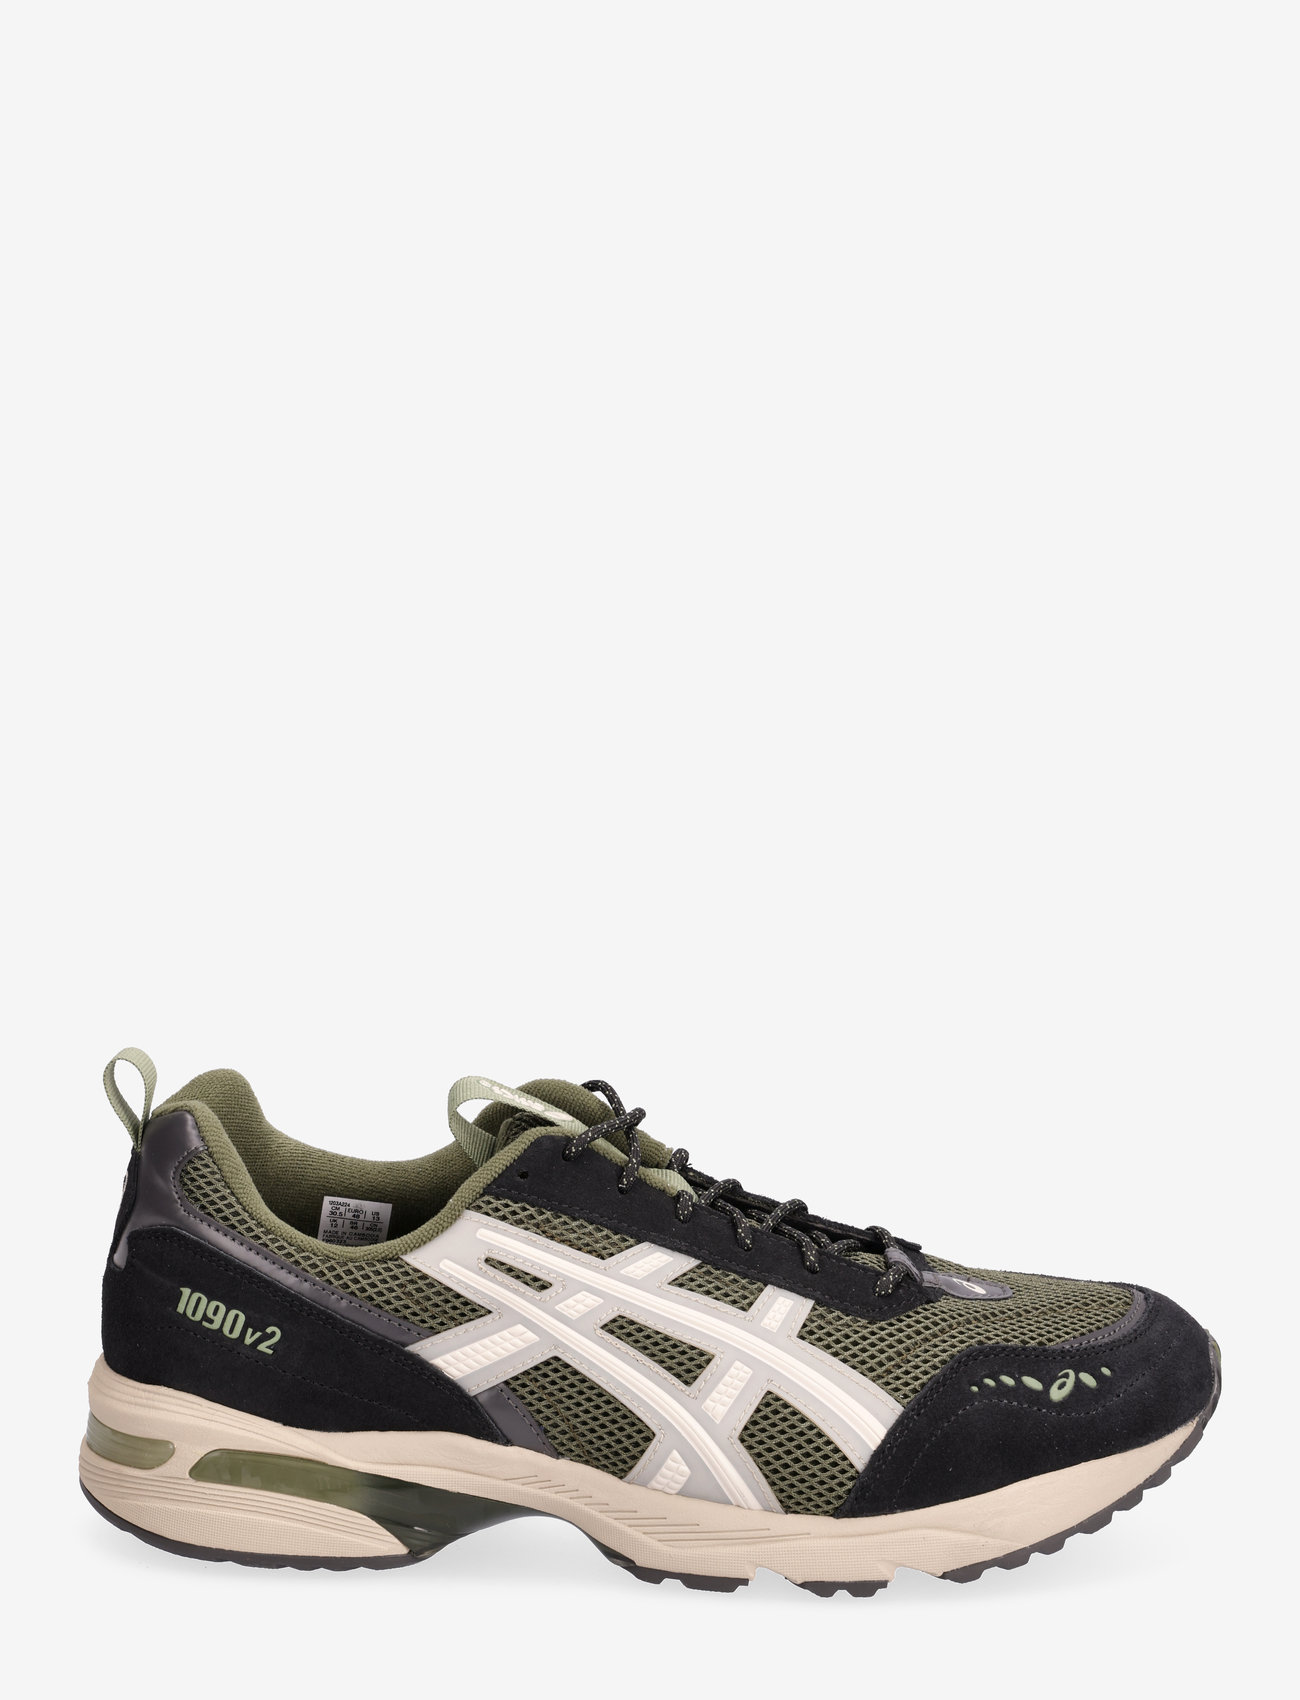 Asics - GEL-1090v2 - låga sneakers - forest/simply taupe - 1